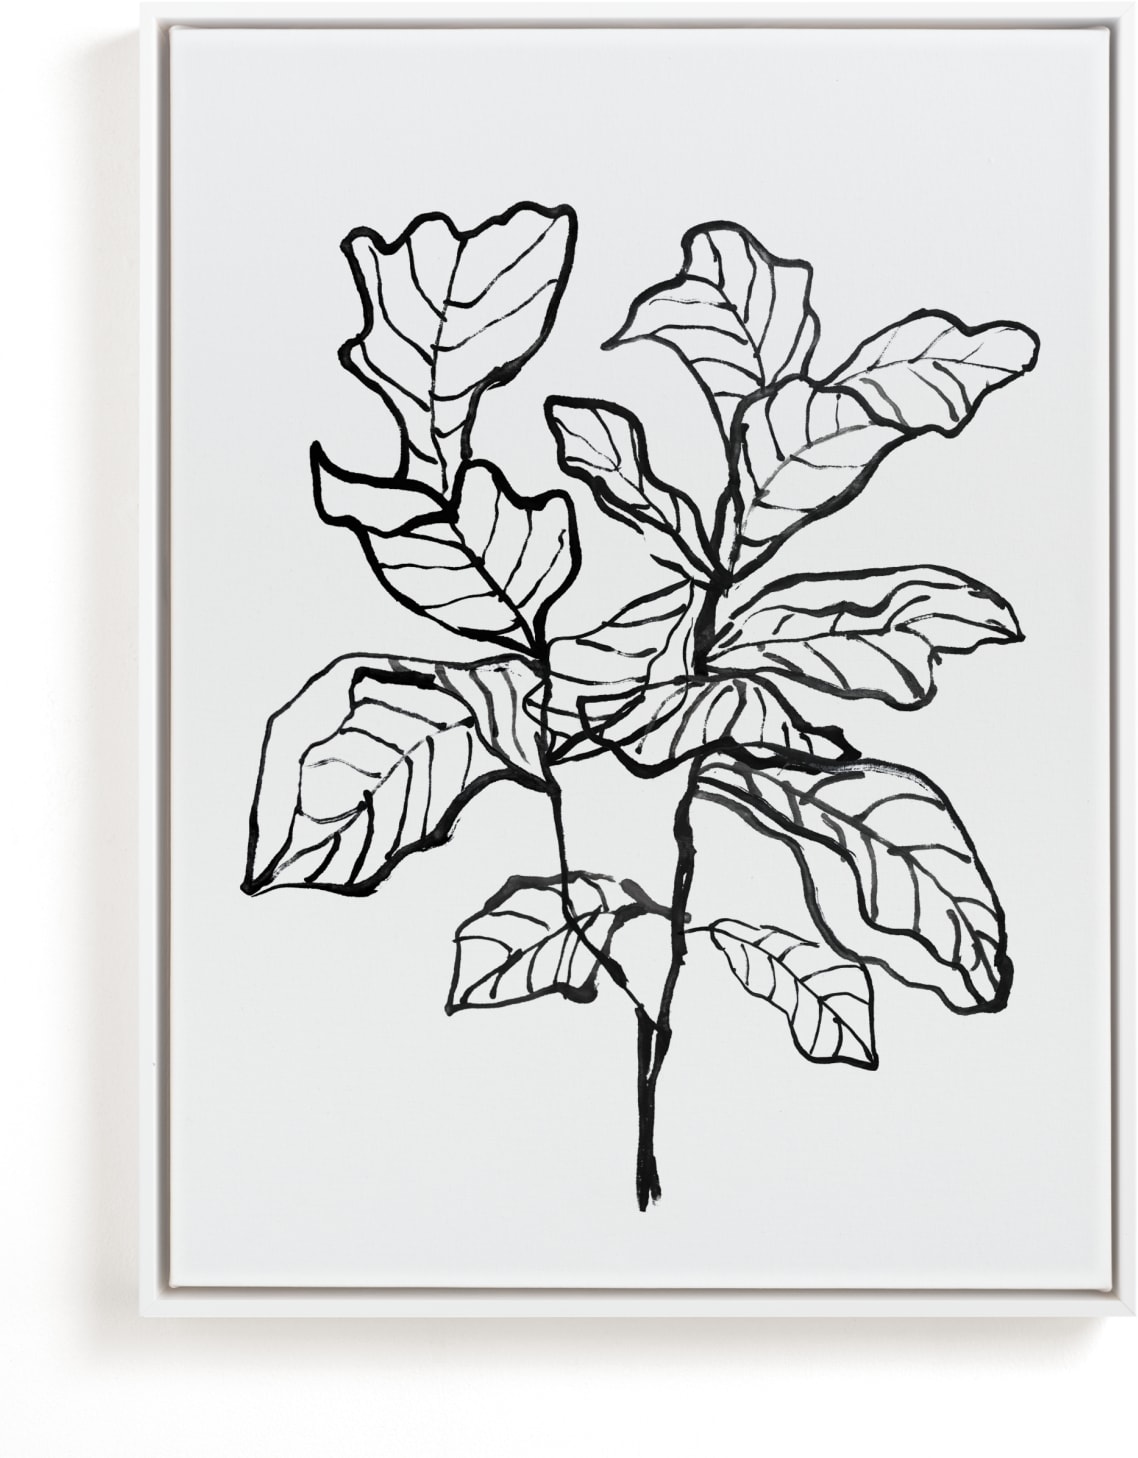 This is a black and white art by Cass Loh called Fiddle-leaf fig tree 1.